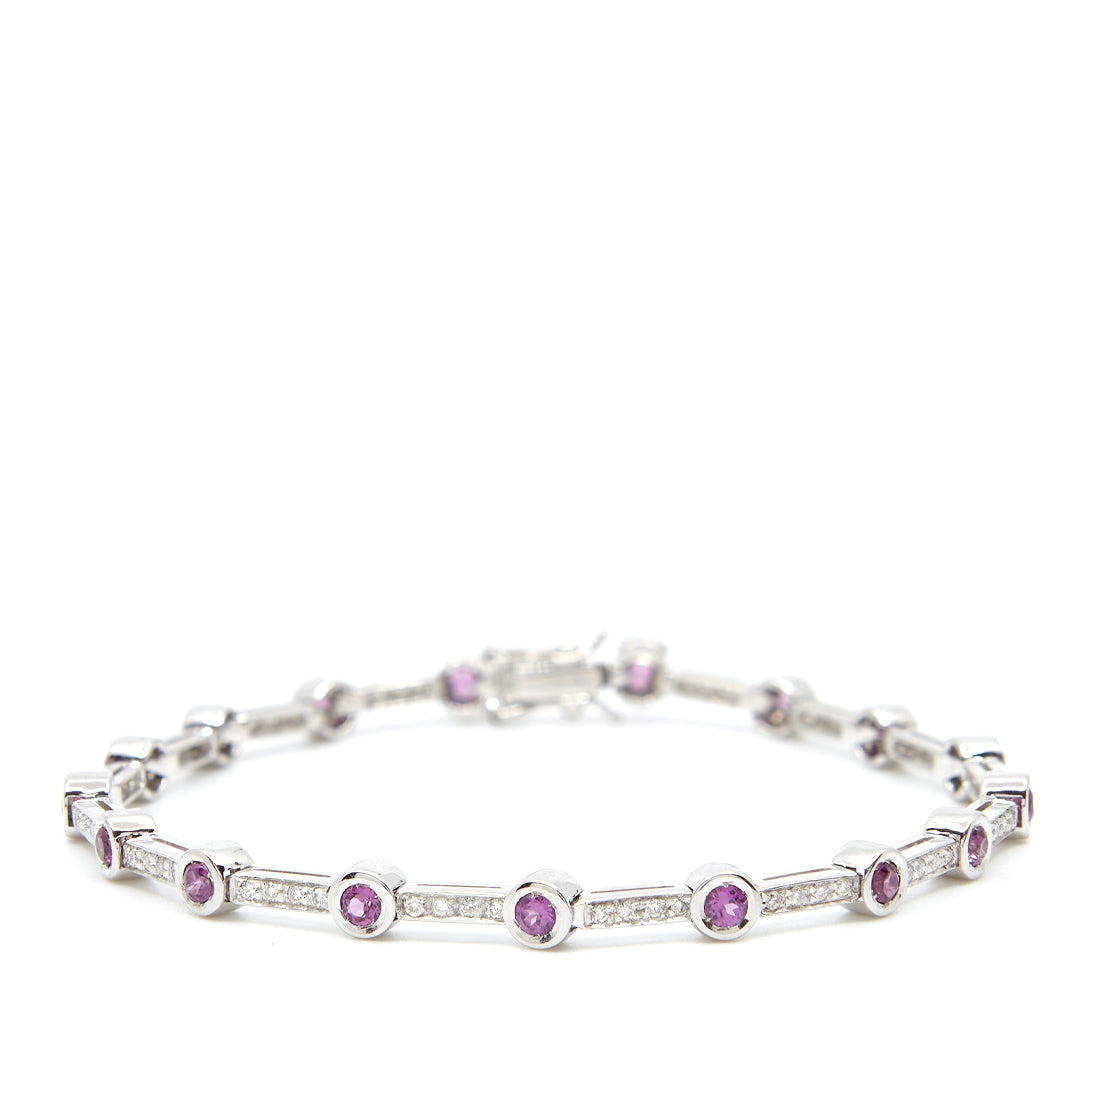 White gold bracelet with pink sapphire and diamond